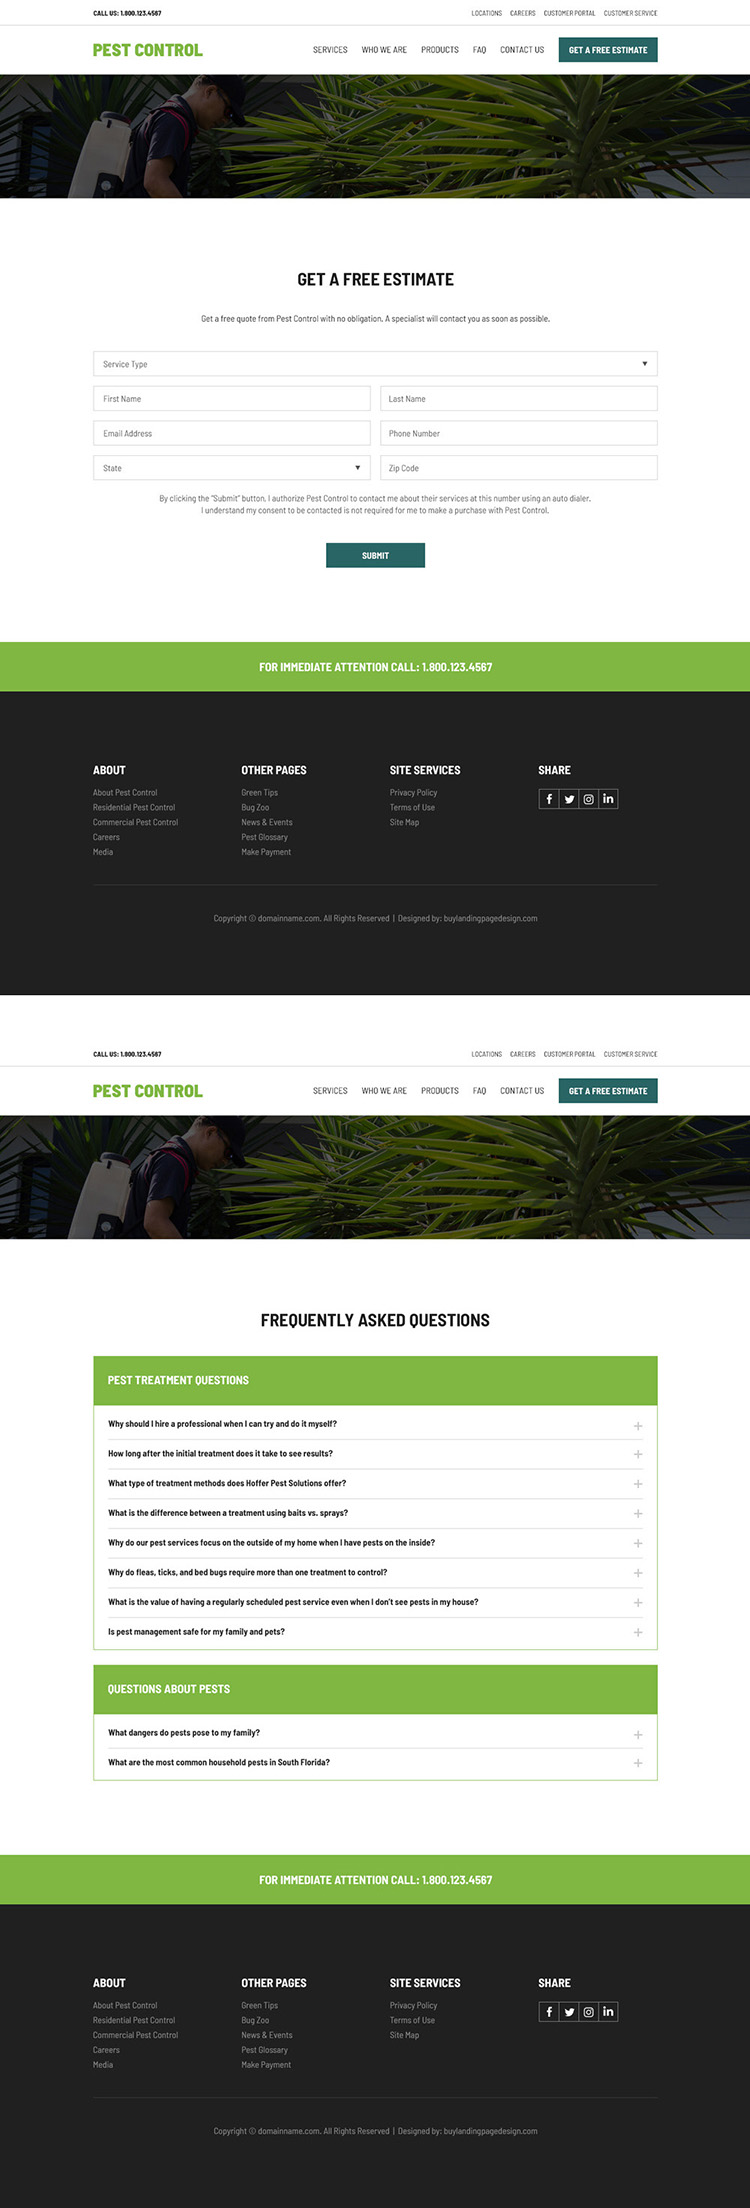 pest control product and services responsive website design